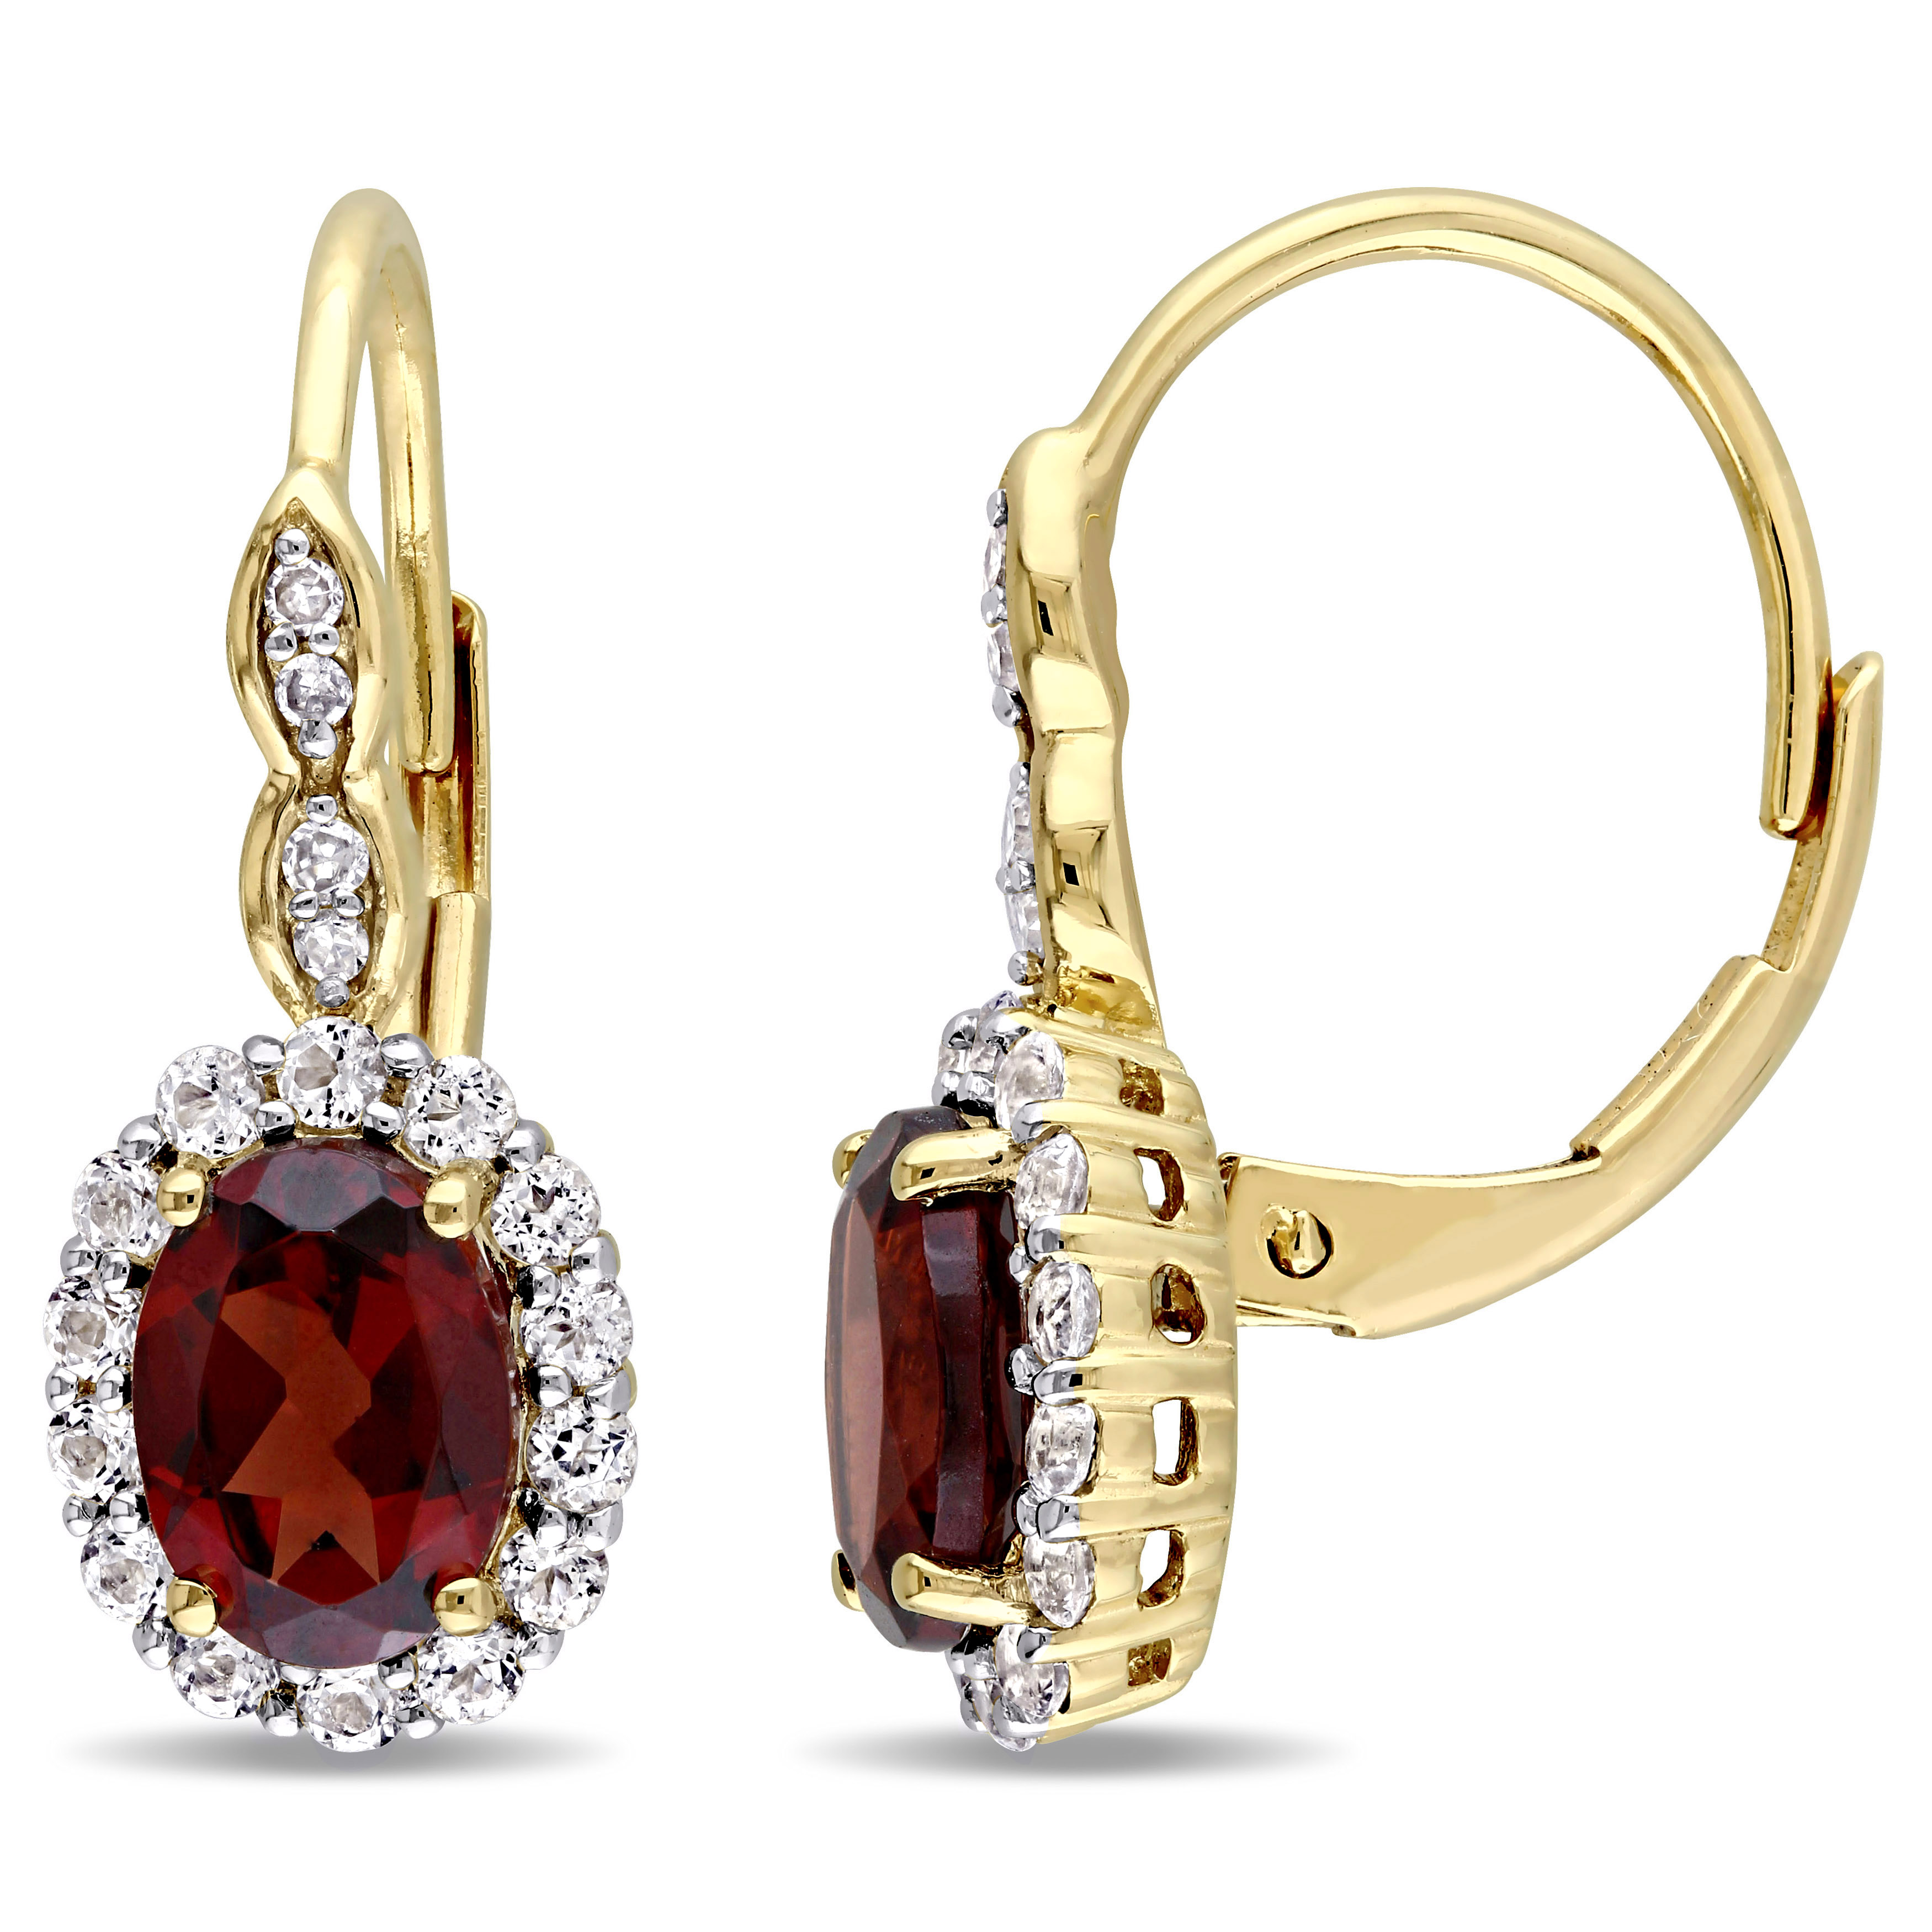 2 3/4 CT TGW Oval Shape Garnet, White Topaz, and Diamond Accent Vintage Leverback Earrings in 14k Yellow Gold